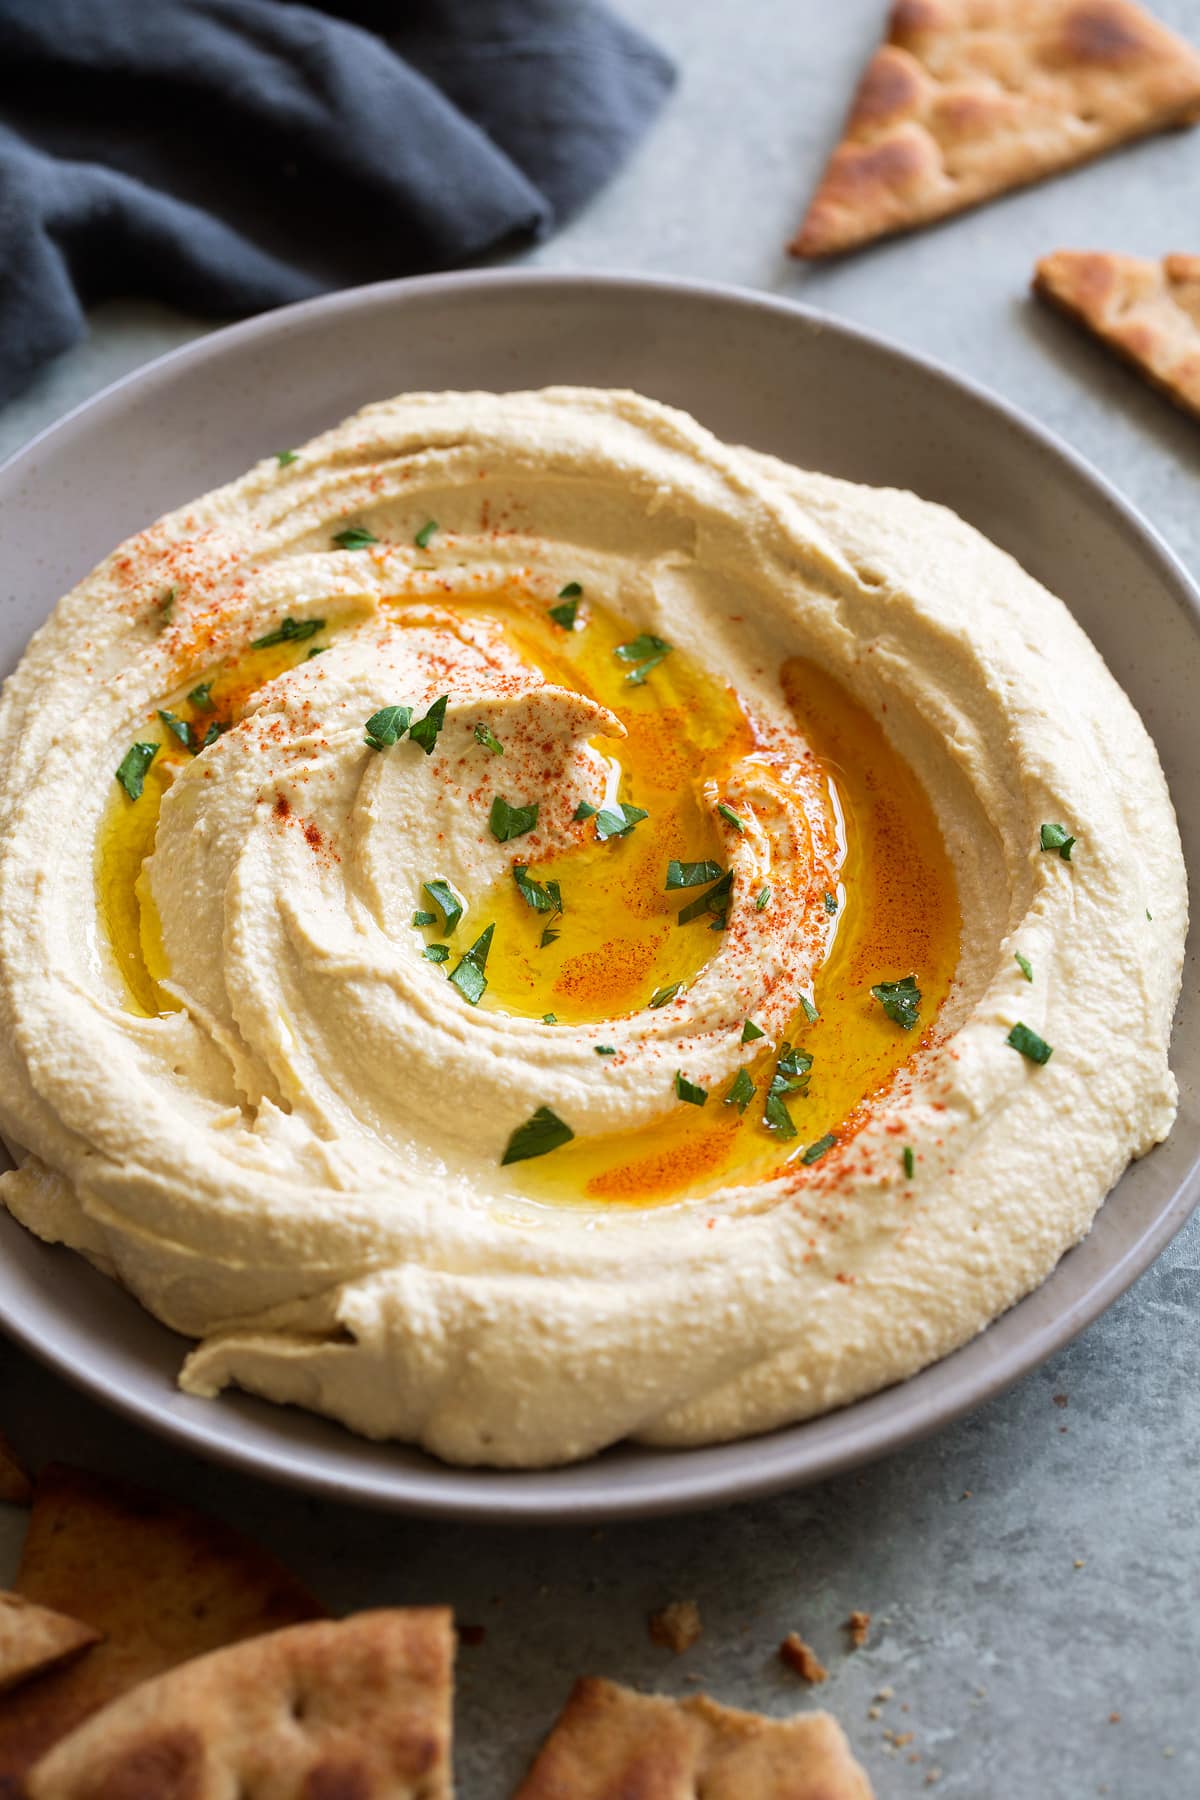 Homemade hummus in serving bowl